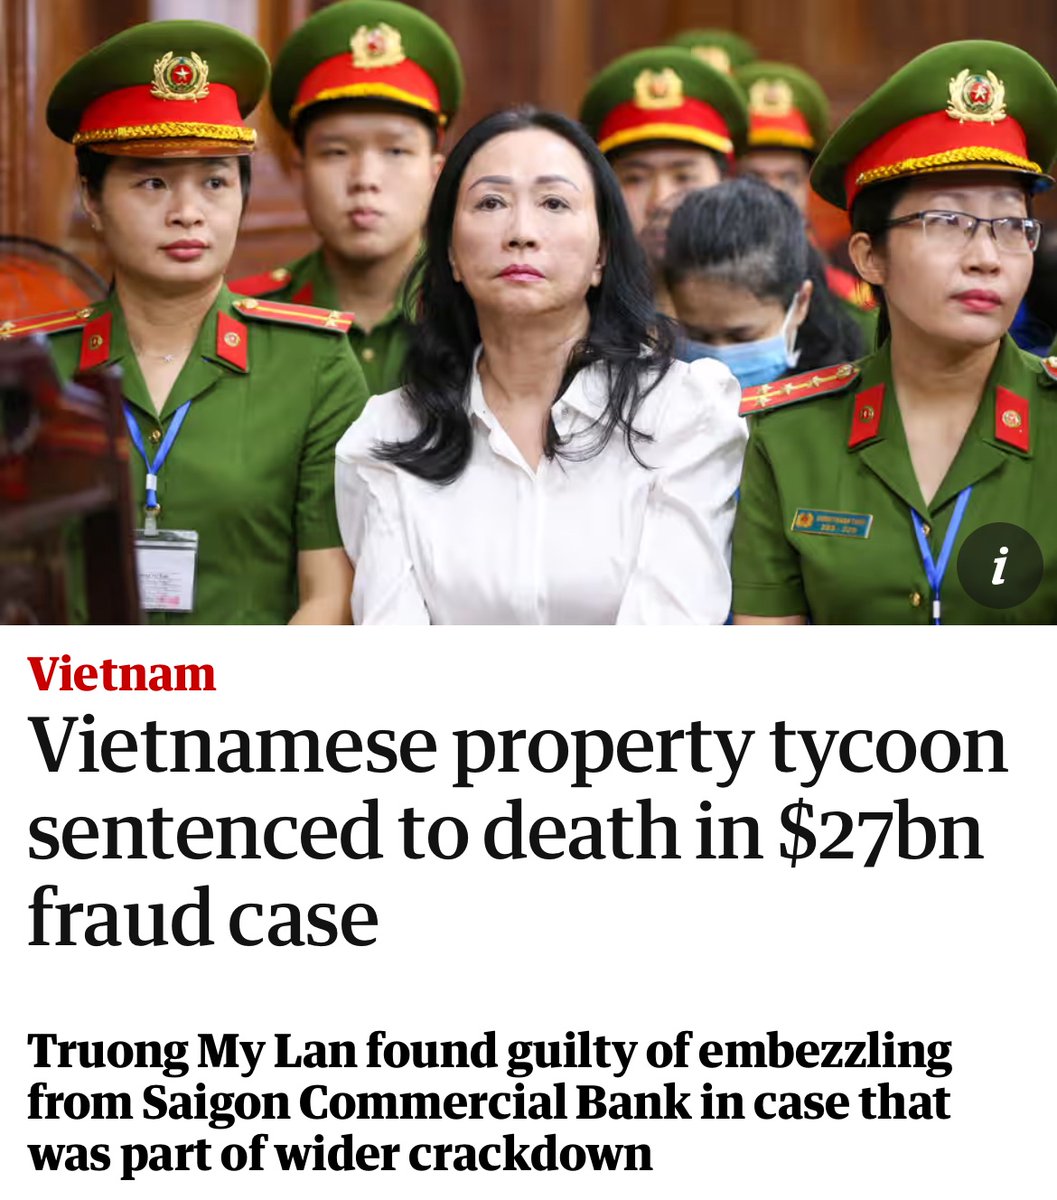 This case is wild: She stole $10.7% ($44bn) of Vietnam’s yearly GDP in total. According to prosecutors, over a period of three years, she ordered her driver to withdraw 108 trillion Vietnamese dong, more than $4bn in cash from the bank, and store it in her basement. That much…